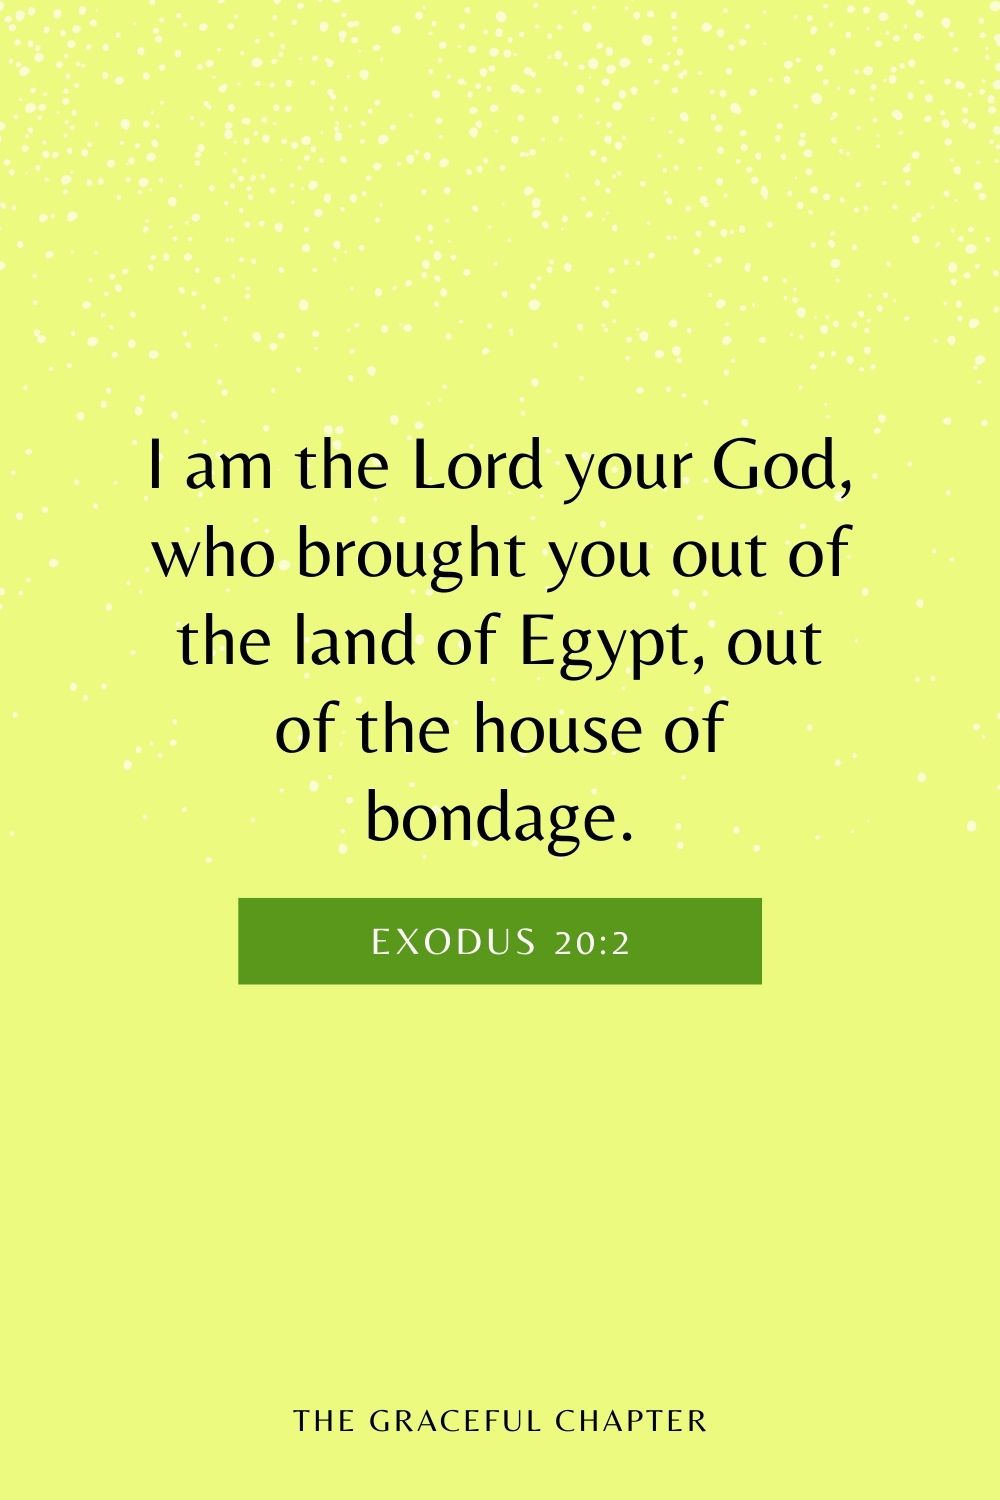 I am the Lord your God, who brought you out of the land of Egypt, out of the house of bondage. Exodus 20:2